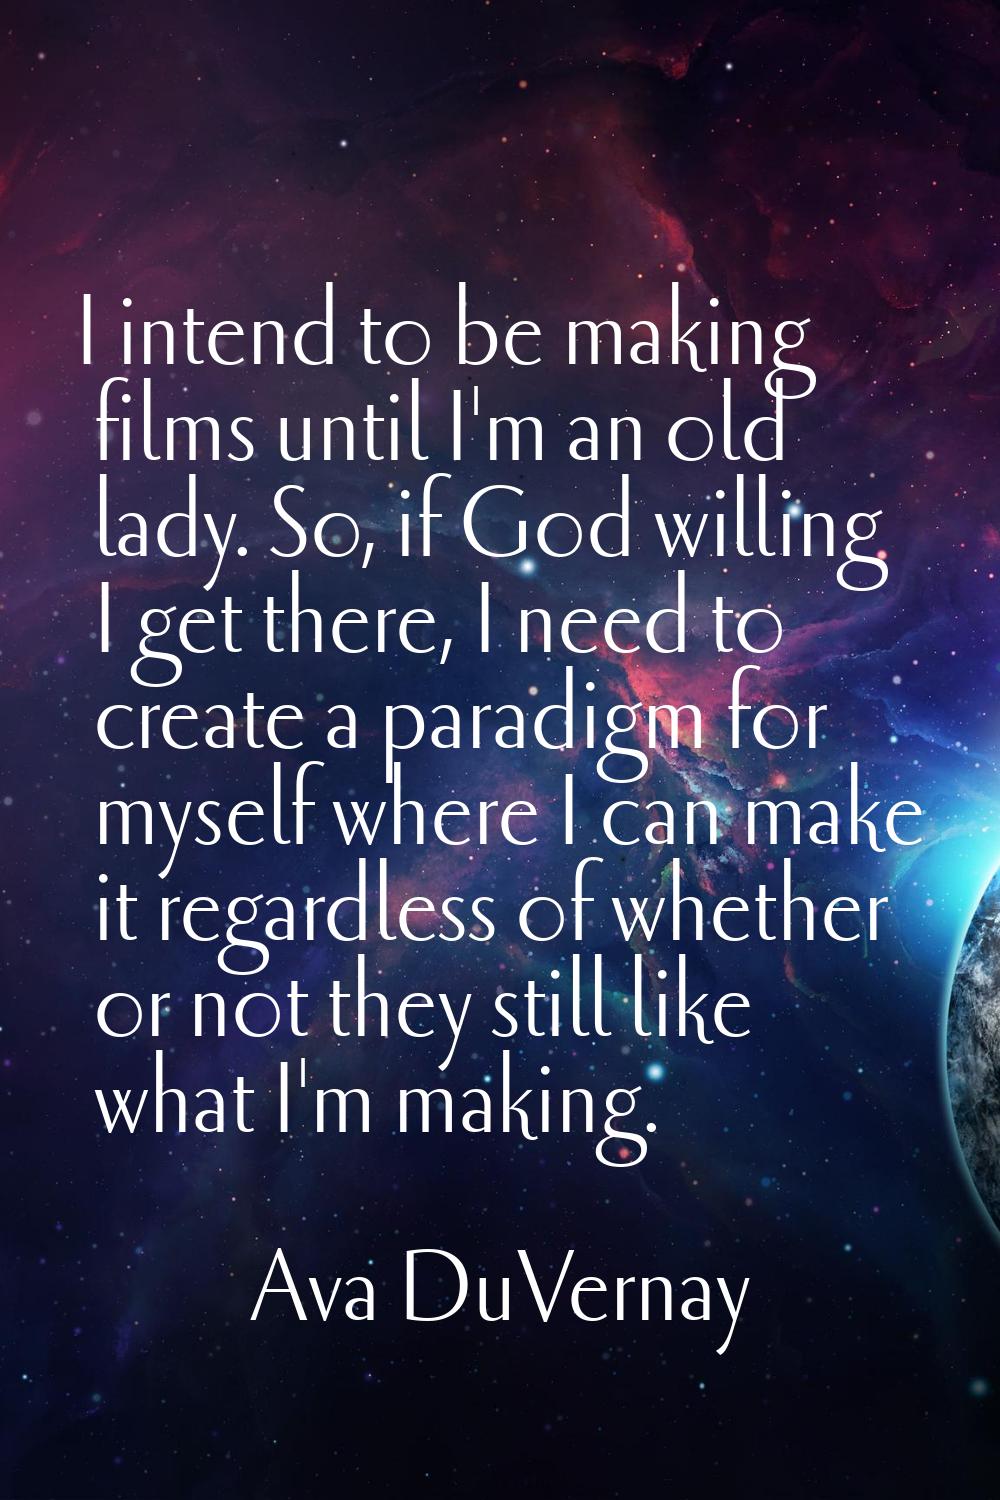 I intend to be making films until I'm an old lady. So, if God willing I get there, I need to create